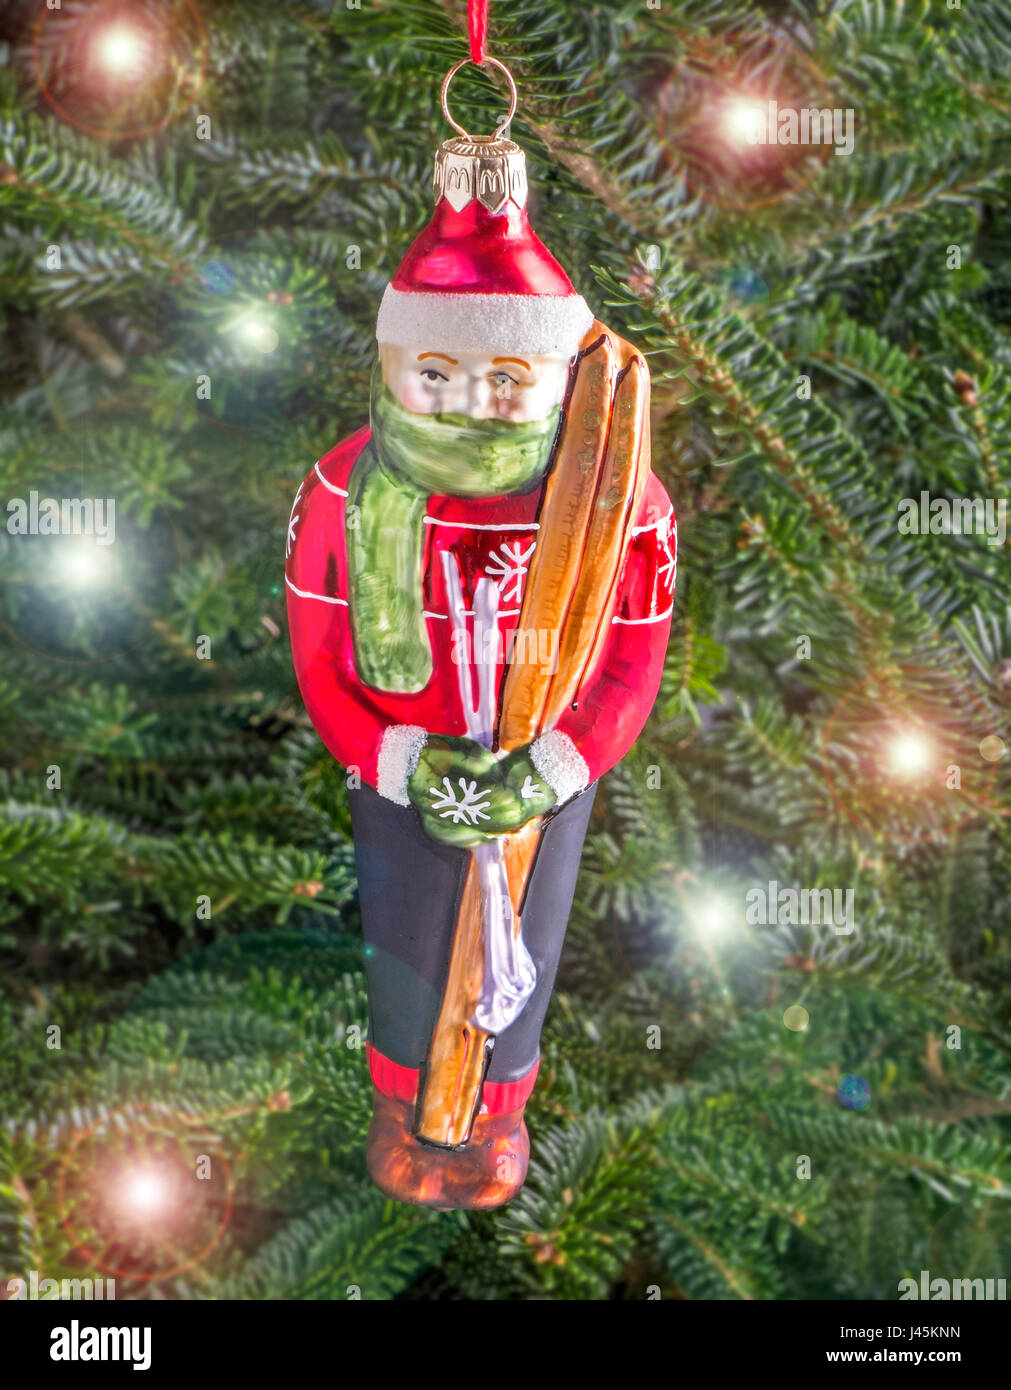 Christmas bauble hanging from a tree in the shape of a Skier Stock Photo